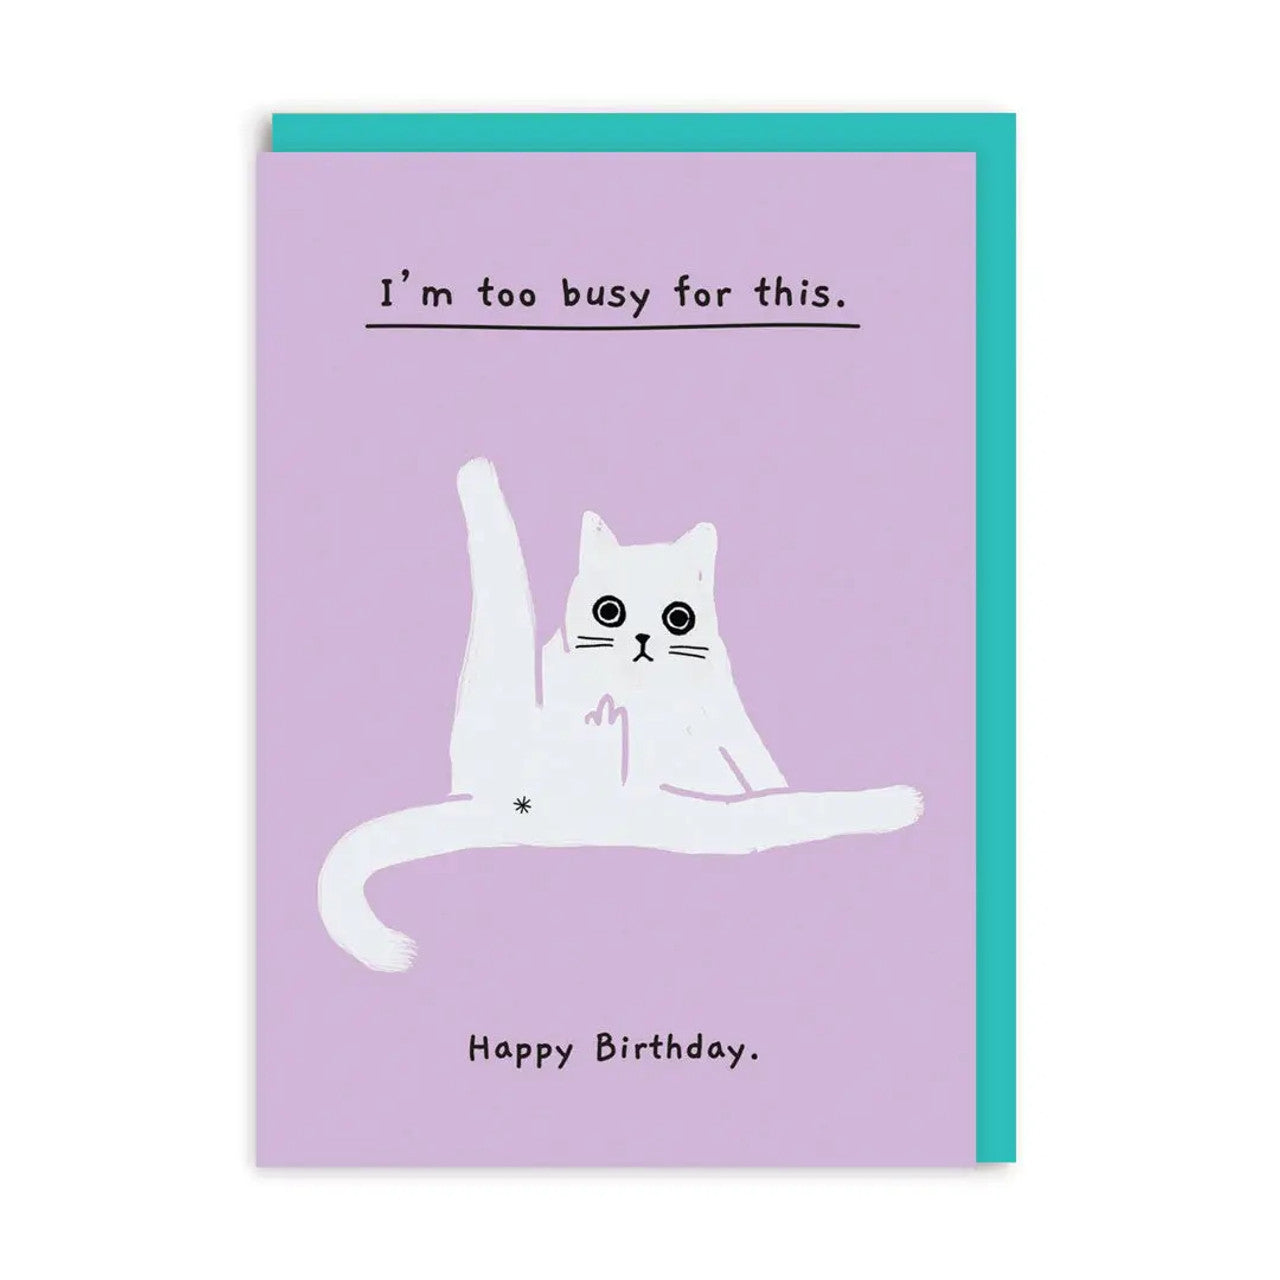 Birthday Card text reads "I'm too busy for this. Happy Birthday"